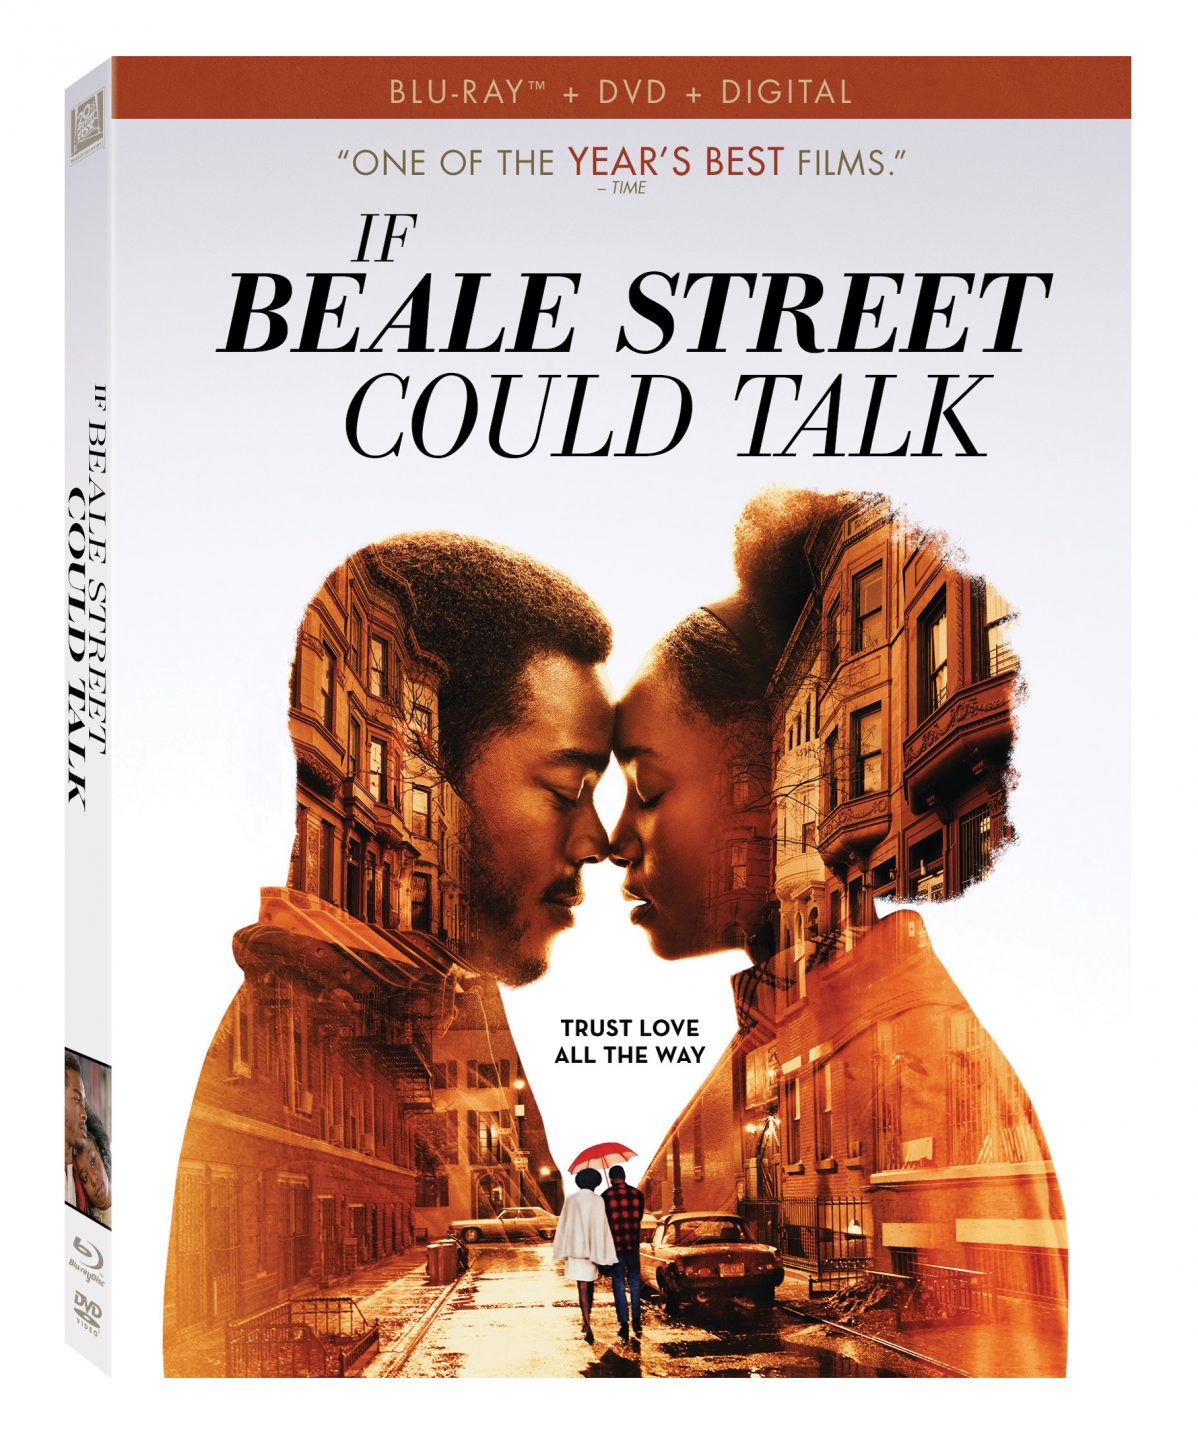 If Beale Street Could Talk Blu-Ray Combo Pack cover (20th Century Fox/Annapurna Pictures)